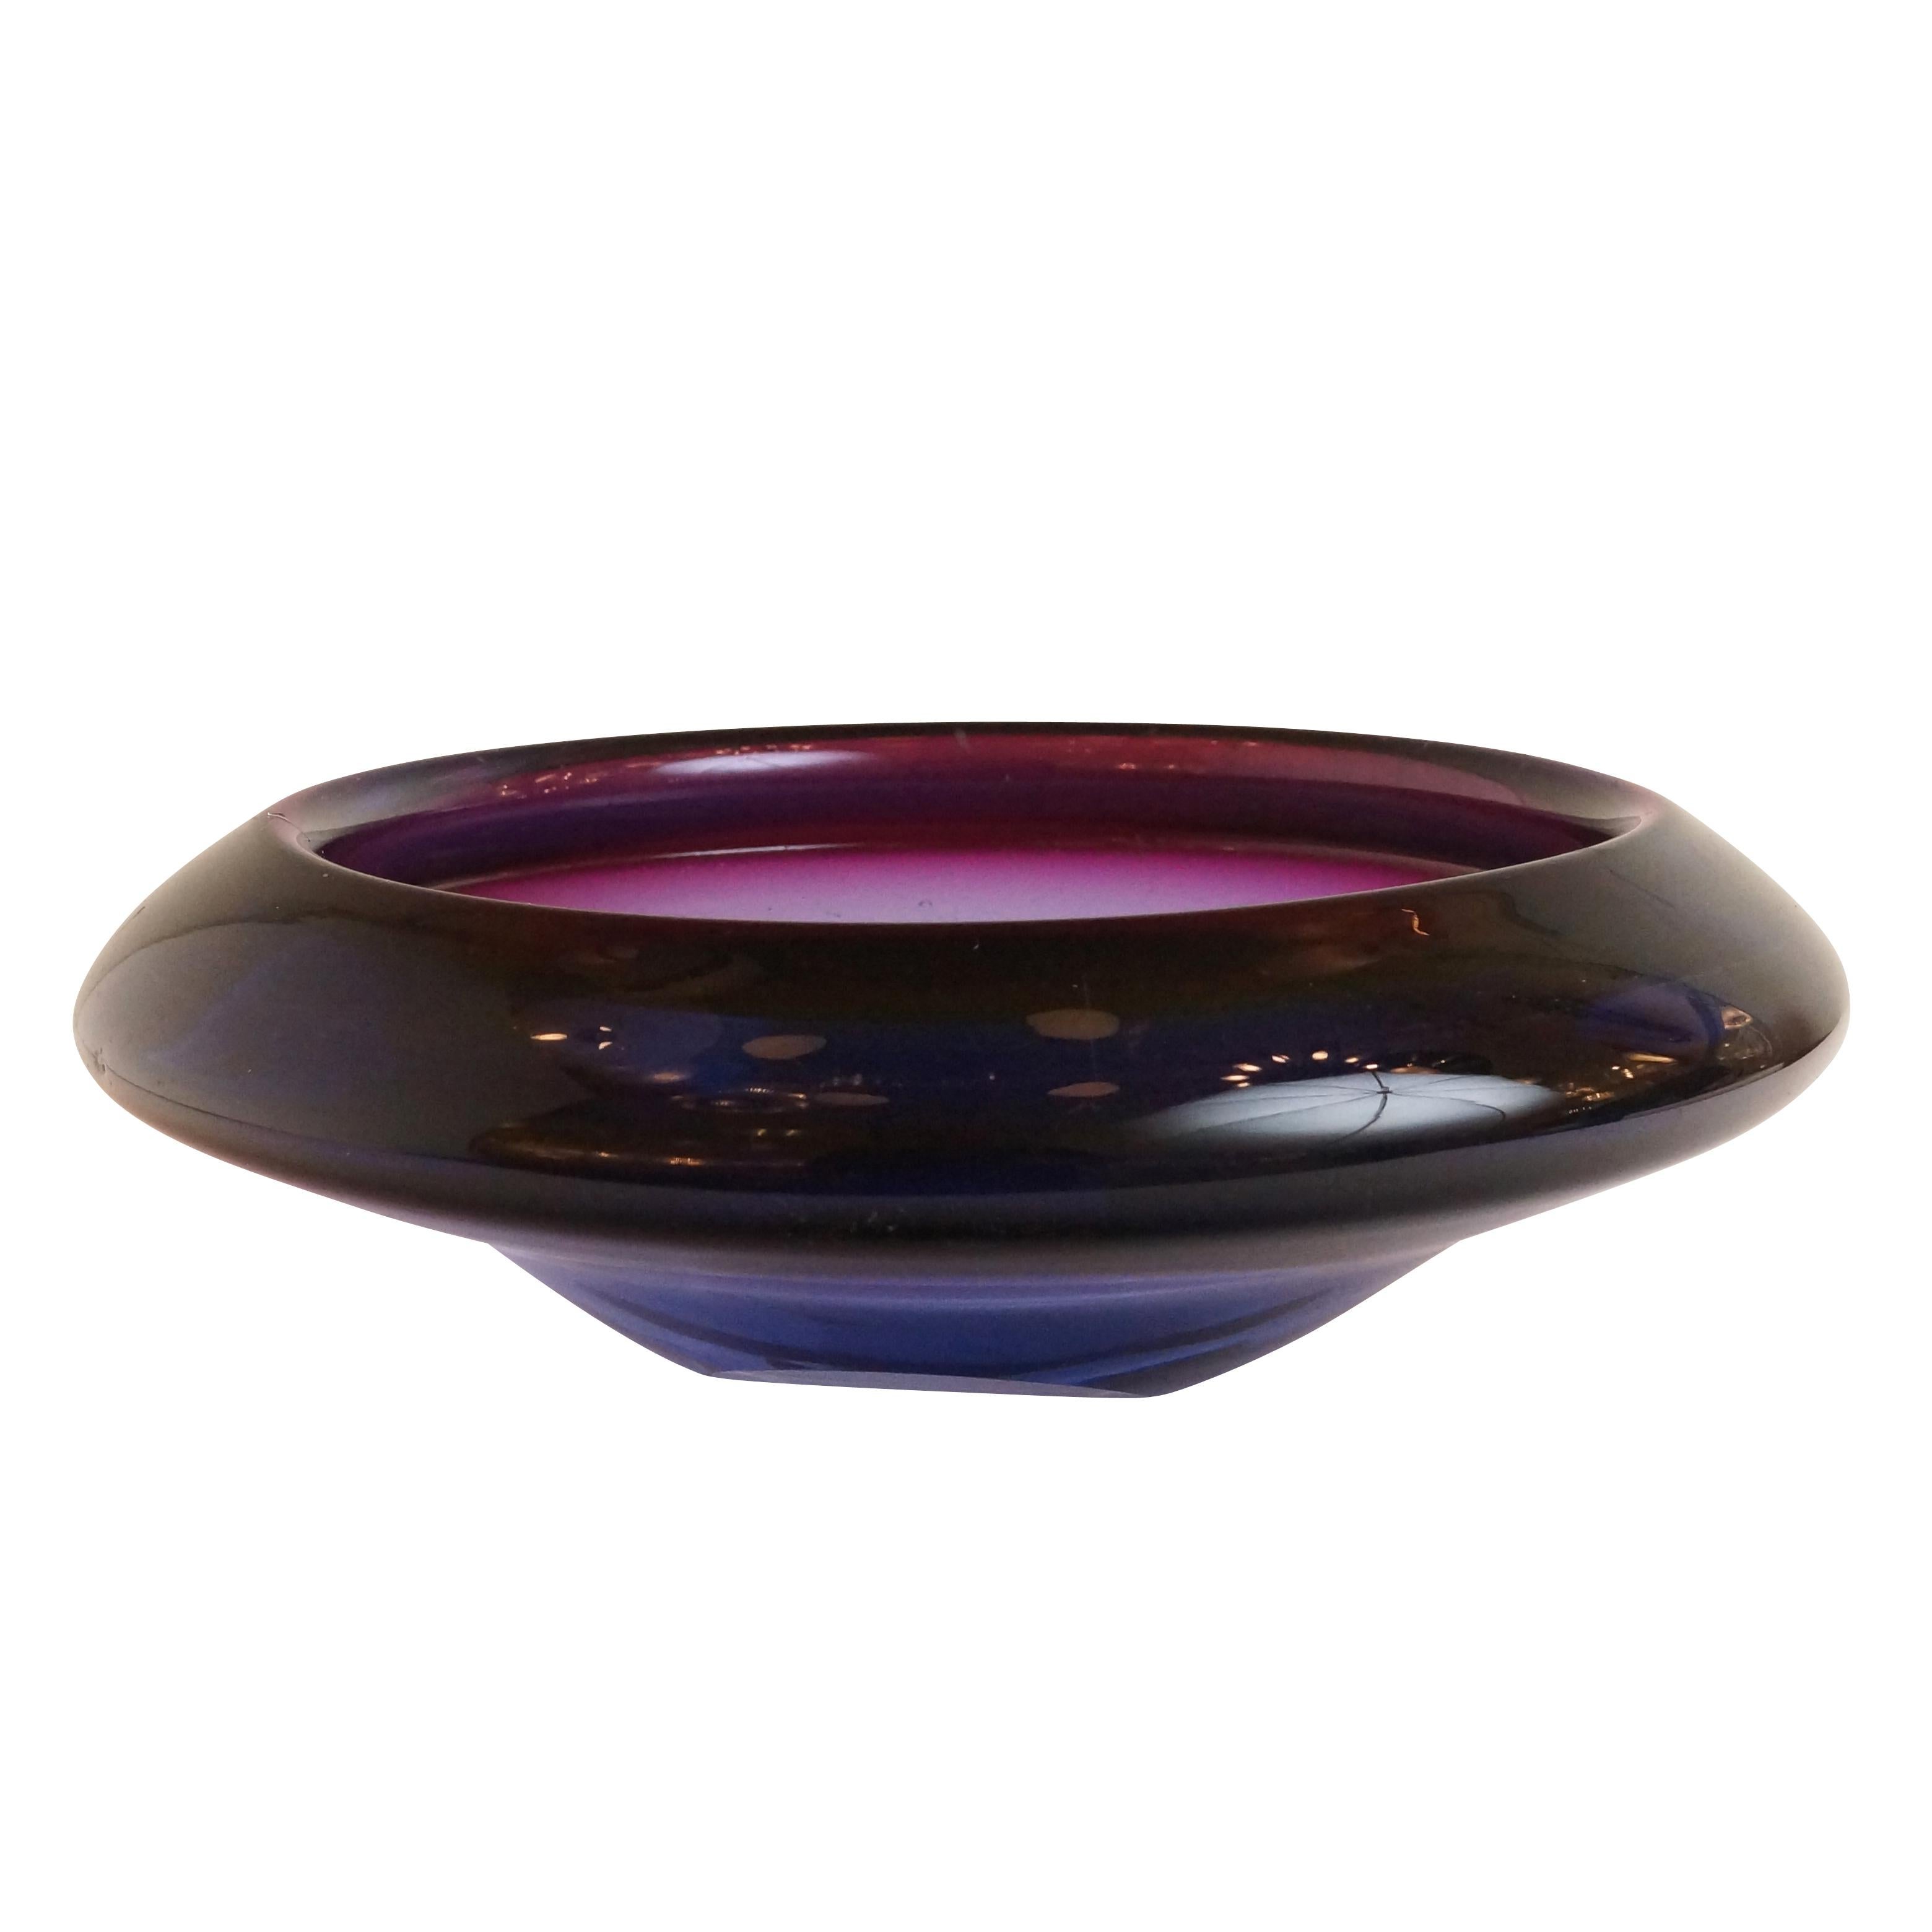 Italian Mid-Century bowl made out of thick purple Murano glass handblown in Venice.

Condition: Excellent vintage condition, minor wear consistent with age and use.

Diameter: 10”

Height: 3.5”